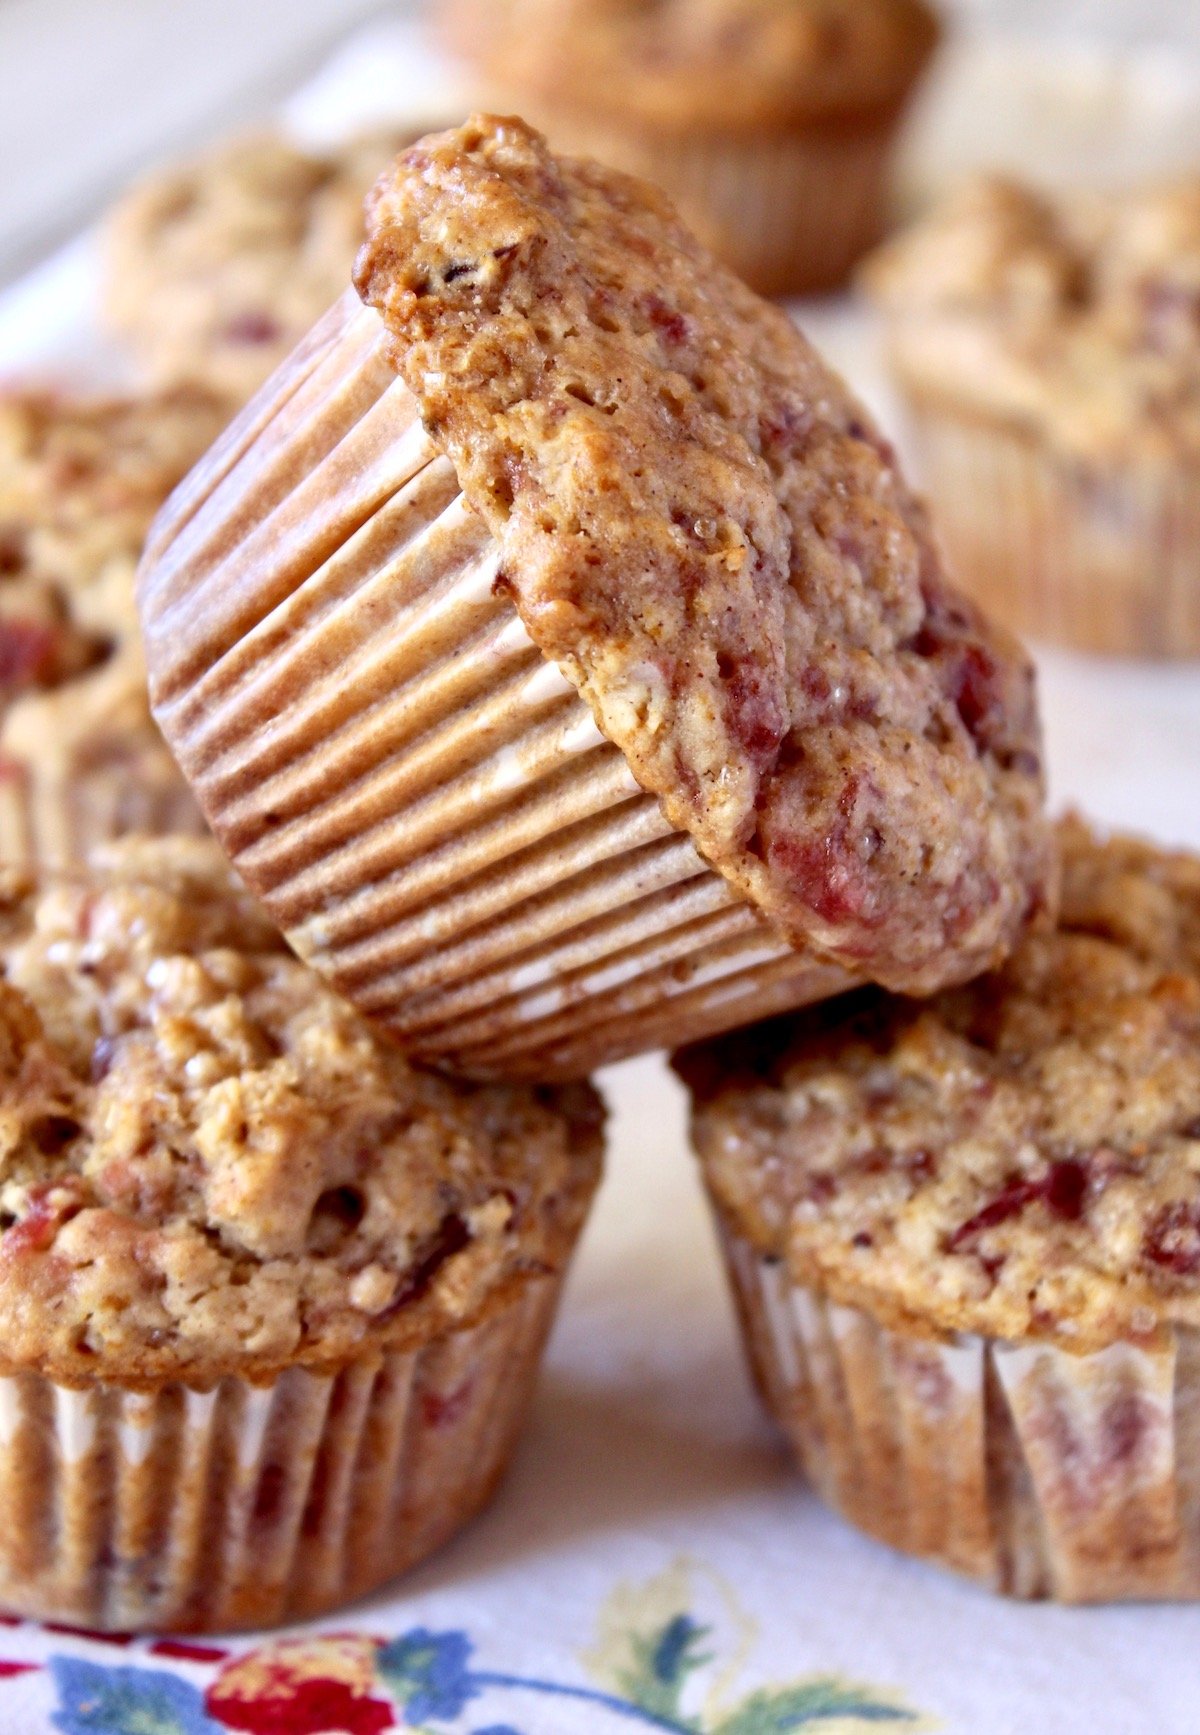 Three baked Cranberry sauce muffins.